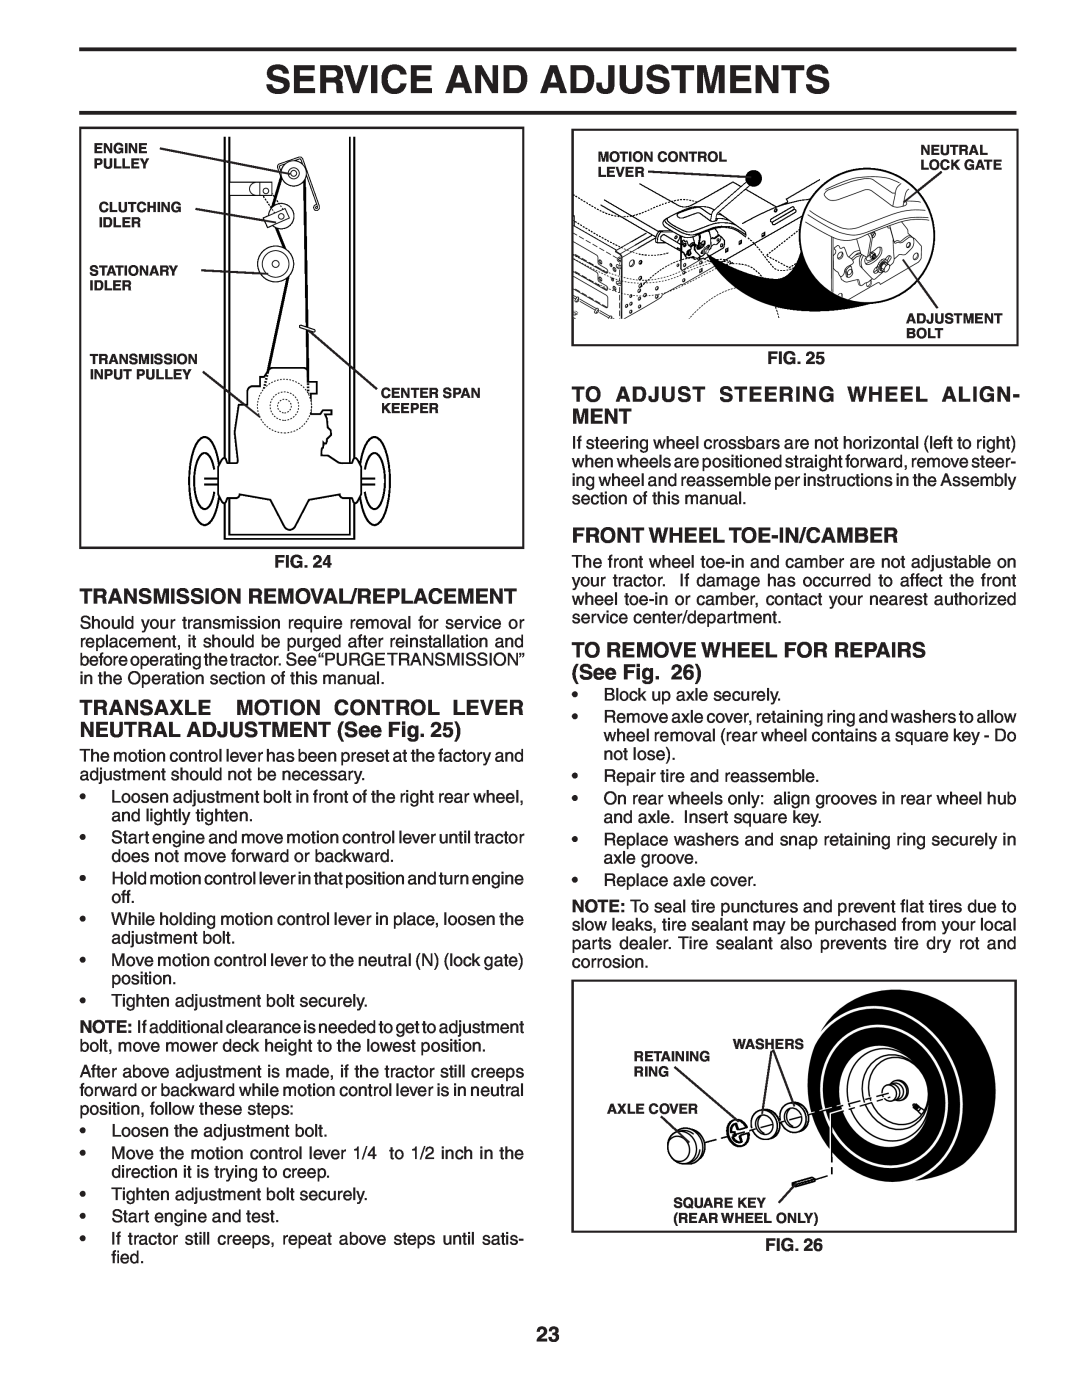 Poulan PD22H42STC owner manual Transmission Removal/Replacement, TRANSAXLE MOTION CONTROL LEVER NEUTRAL ADJUSTMENT See Fig 